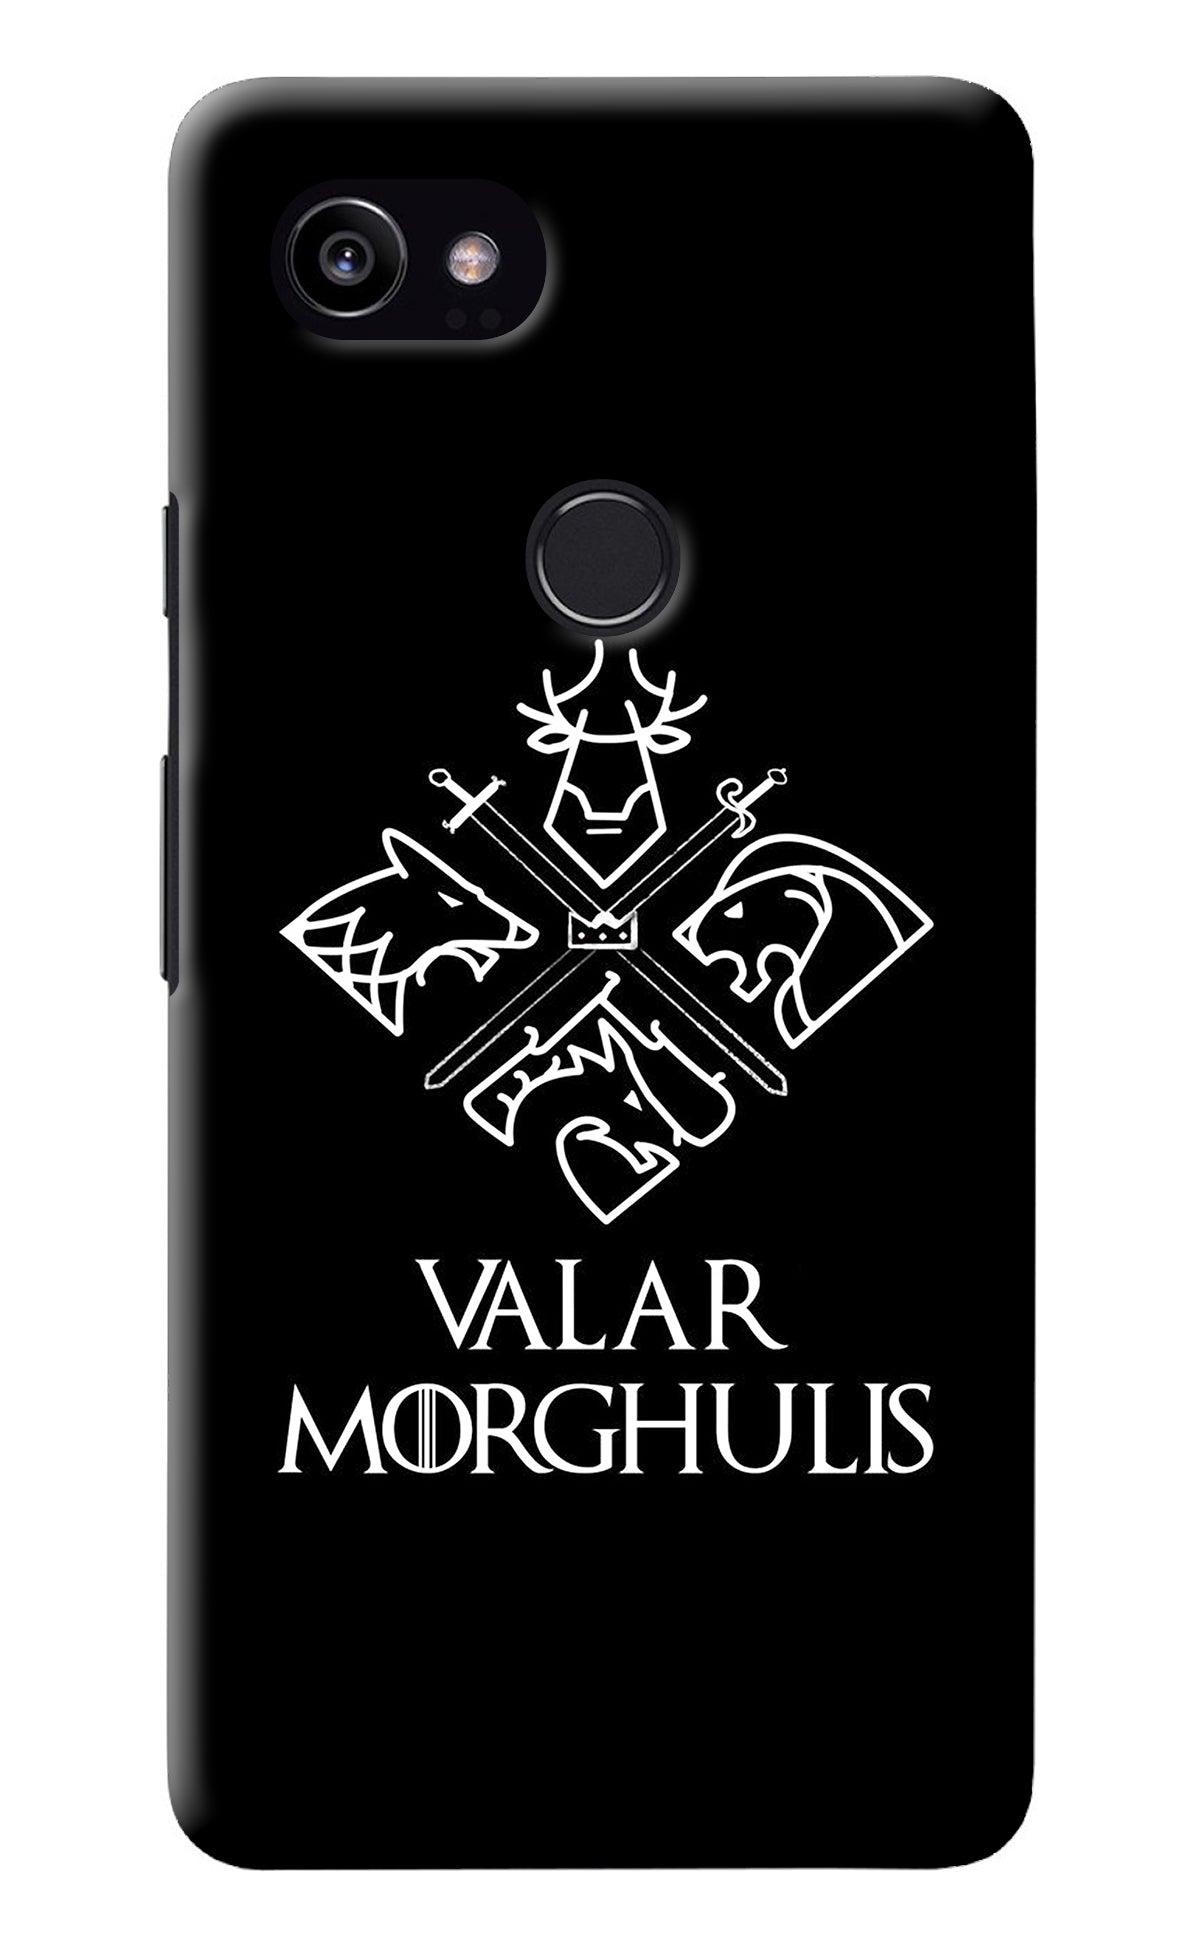 Valar Morghulis | Game Of Thrones Google Pixel 2 XL Back Cover